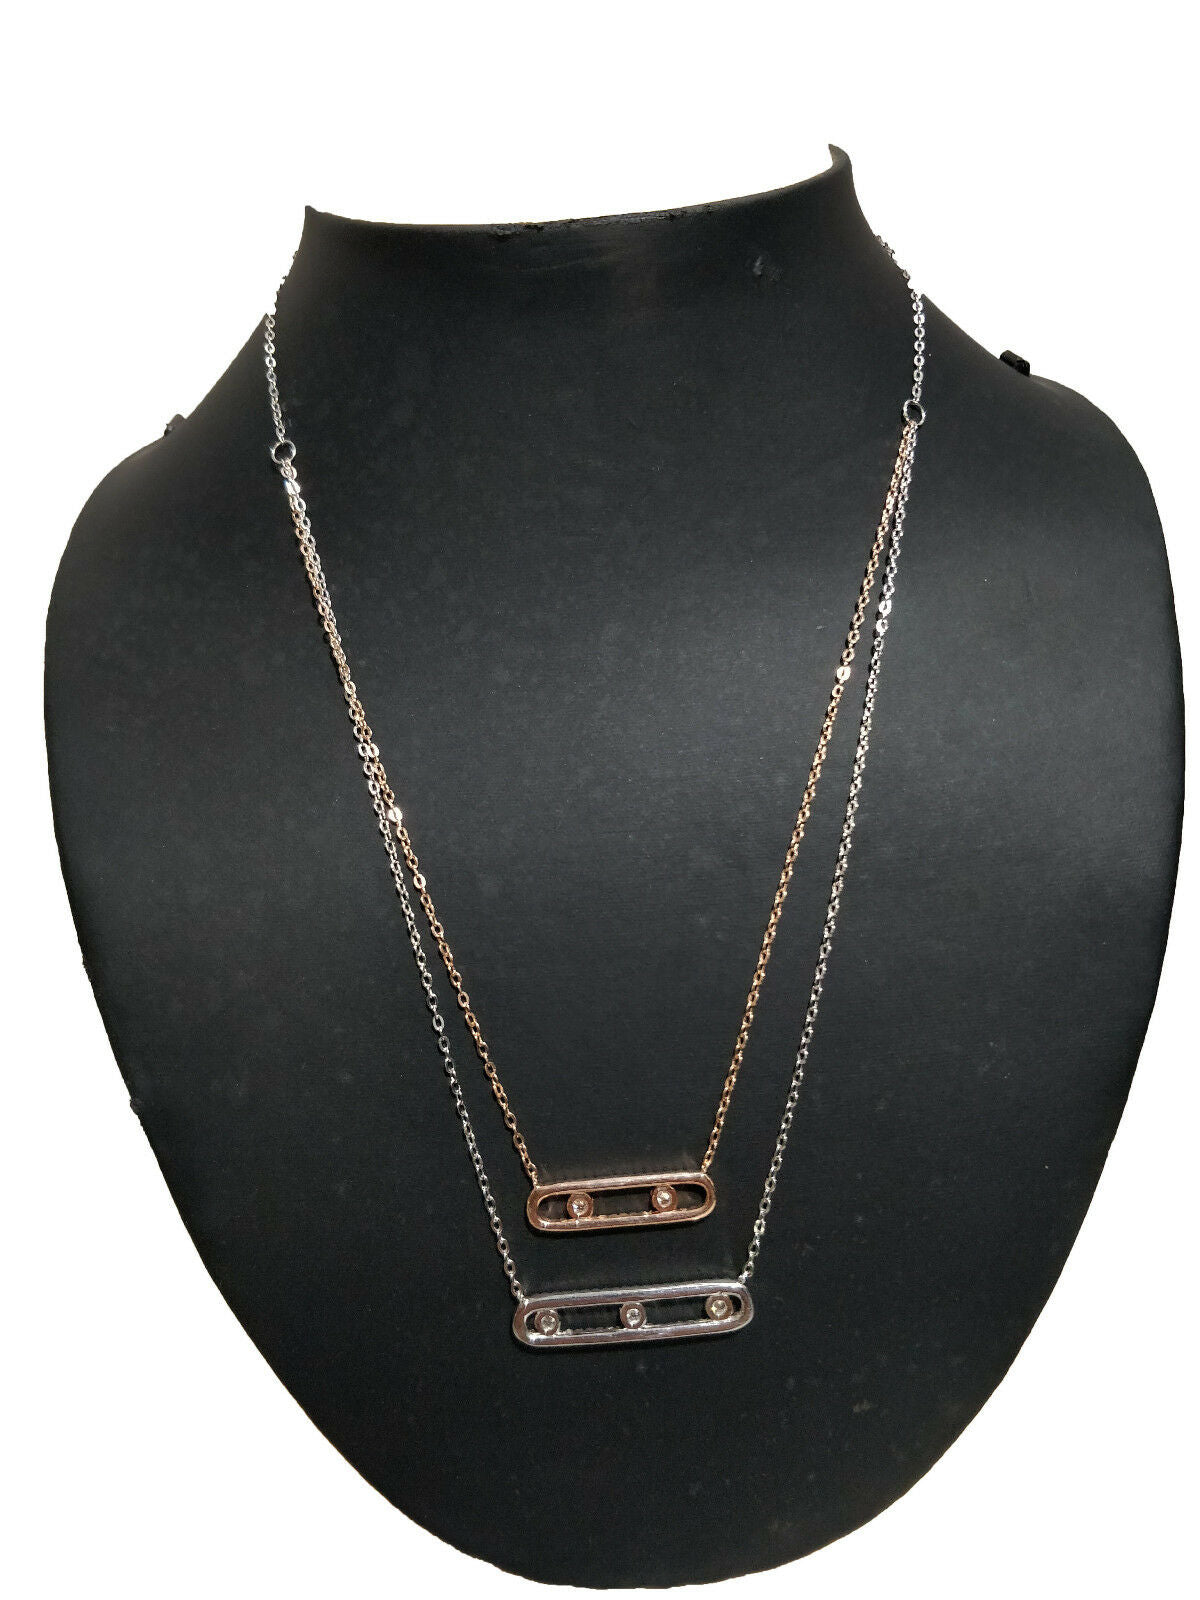 Dazzling Sterling Silver Two-Tone Twisted Omega Necklace. 18